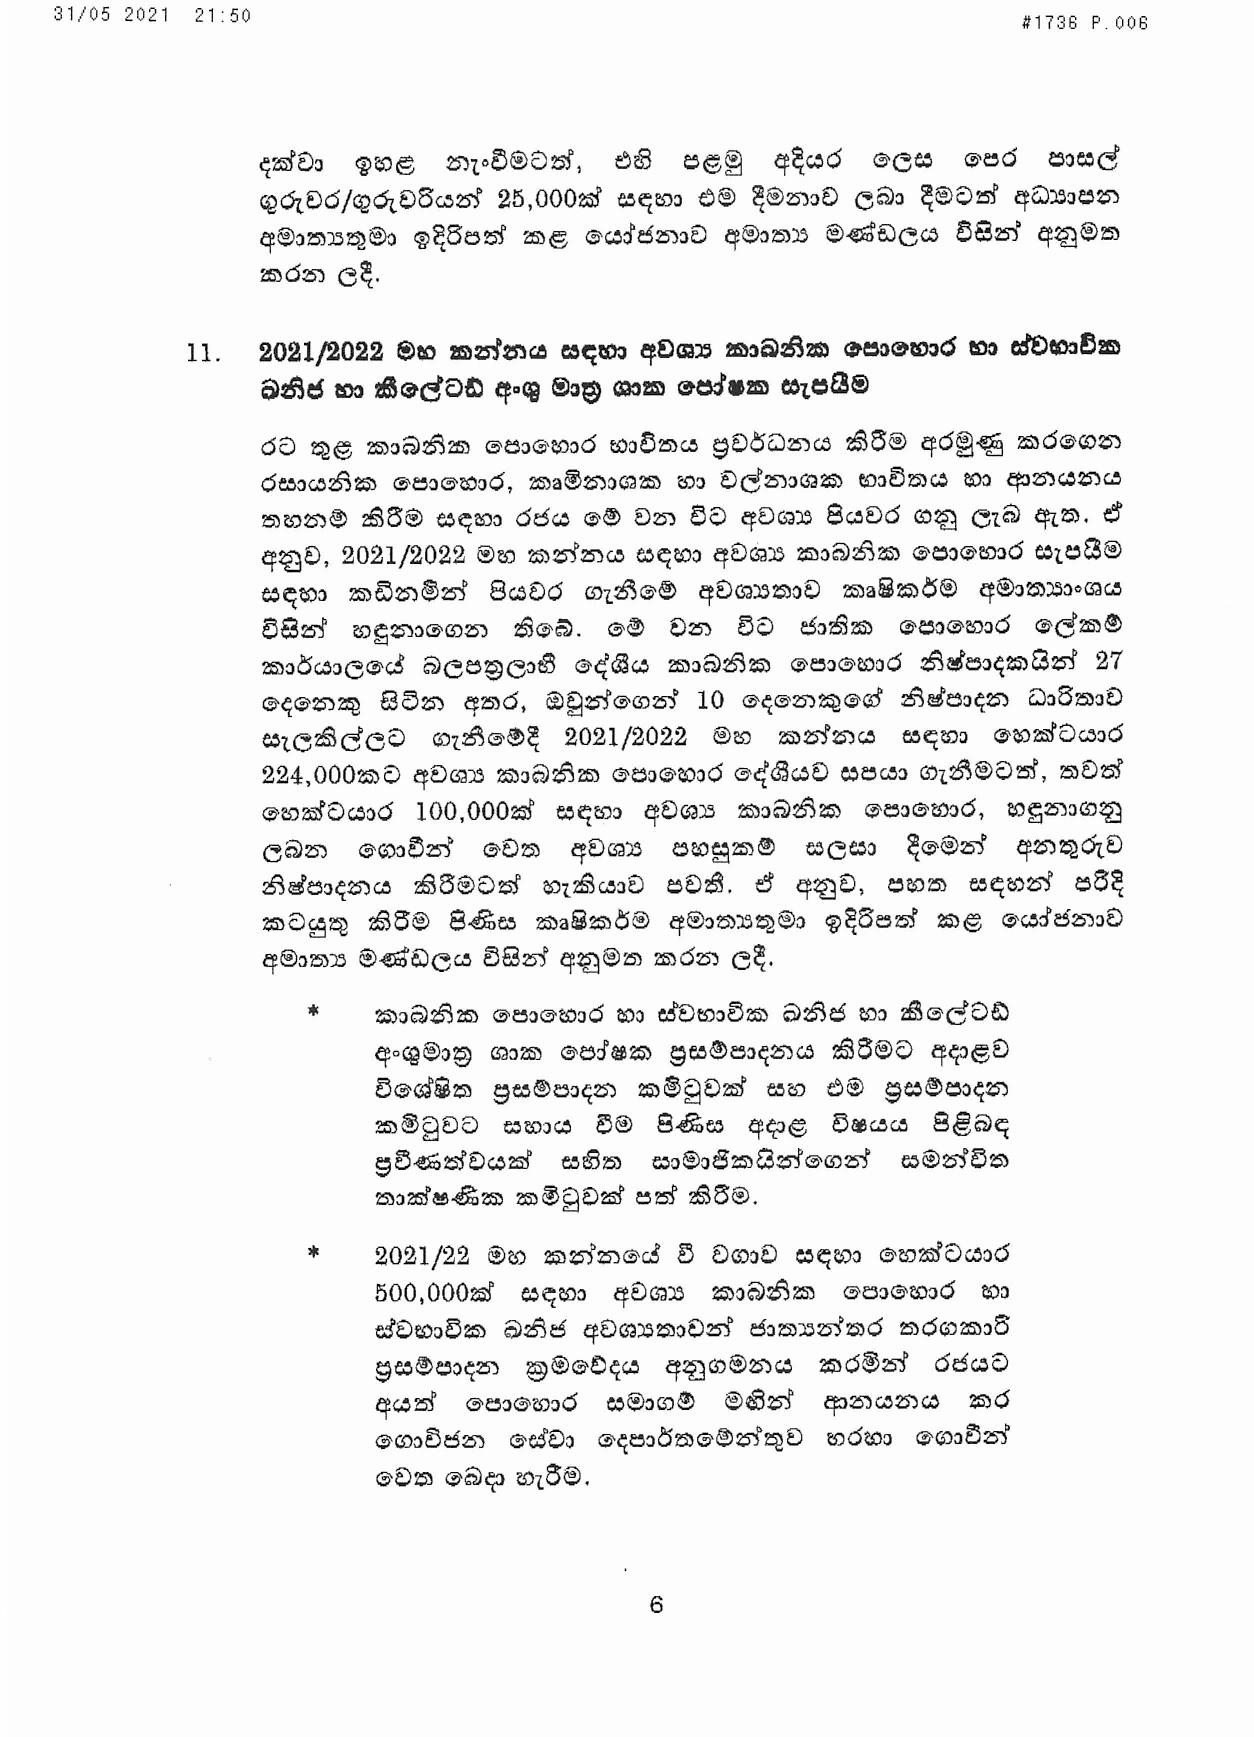 Cabinet Decision on 31.05.2021 page 006